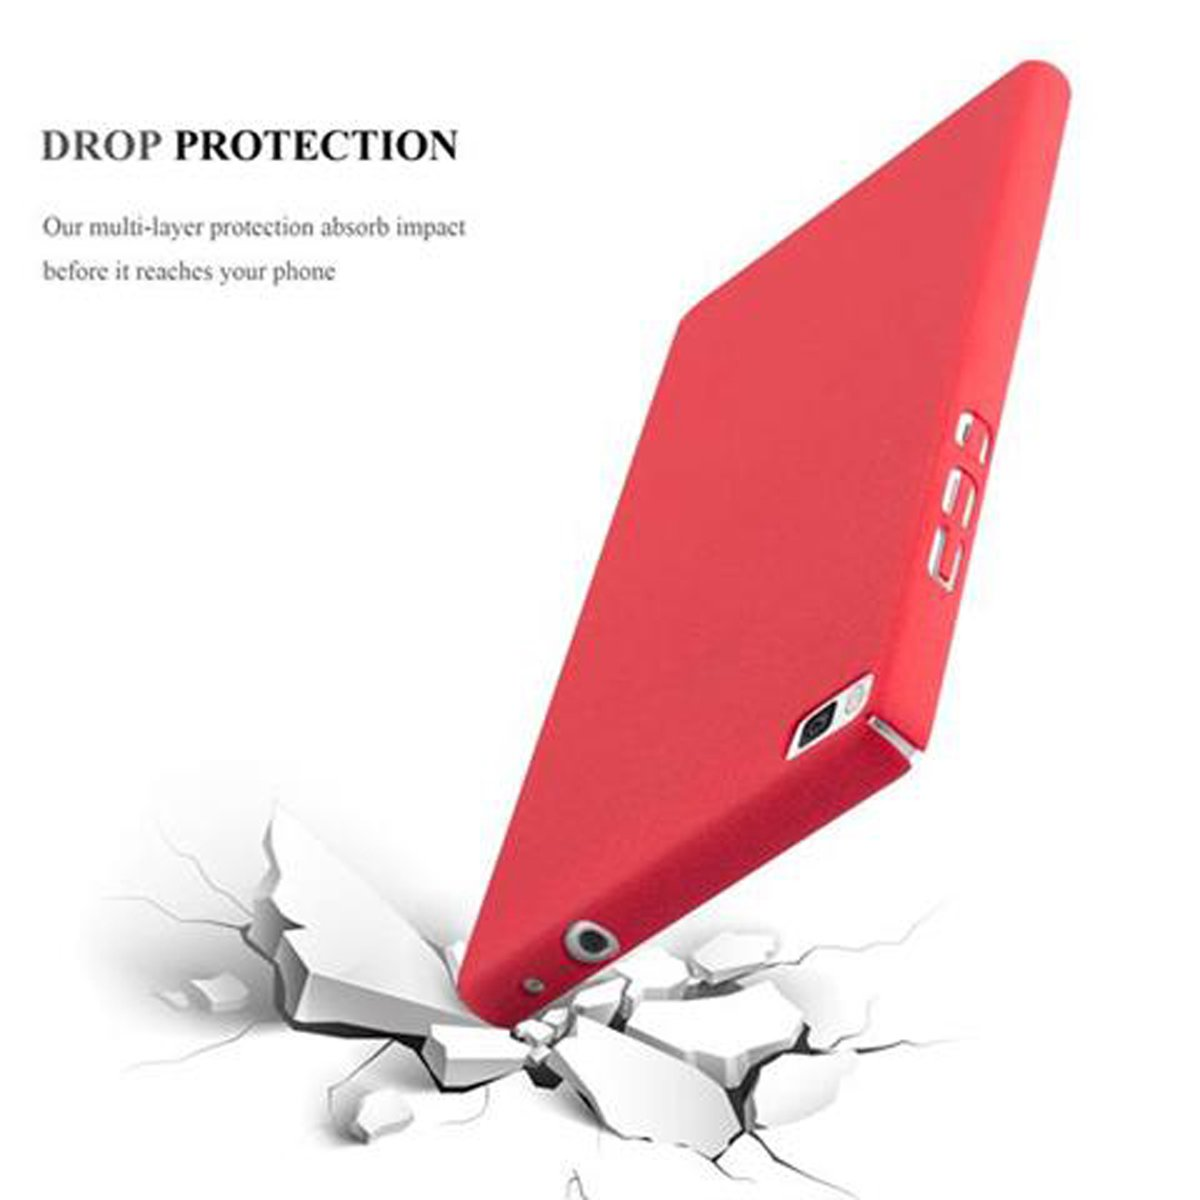 Style, Hülle ROT Hard Frosty Case im Backcover, P8, Huawei, CADORABO FROSTY